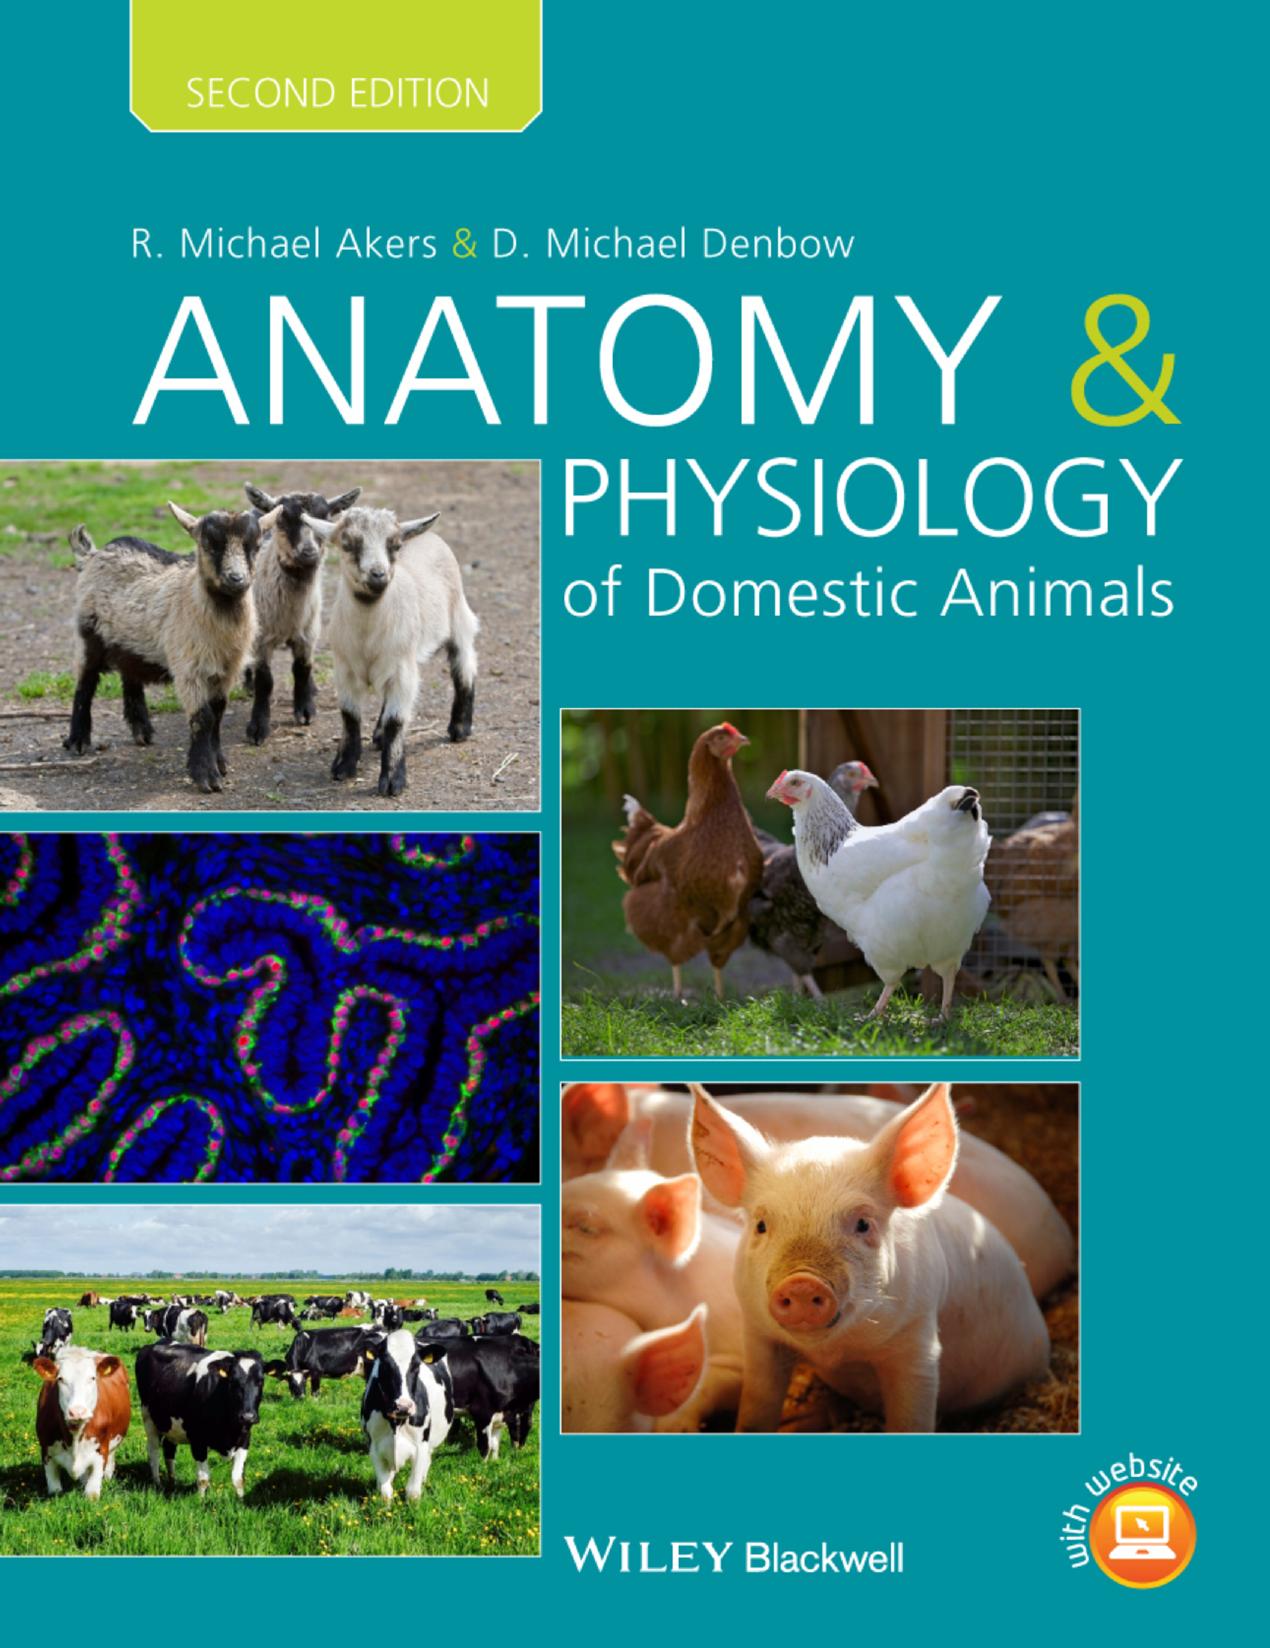 Anatomy and Physiology of Domestic Animals 2nd Edition 2013